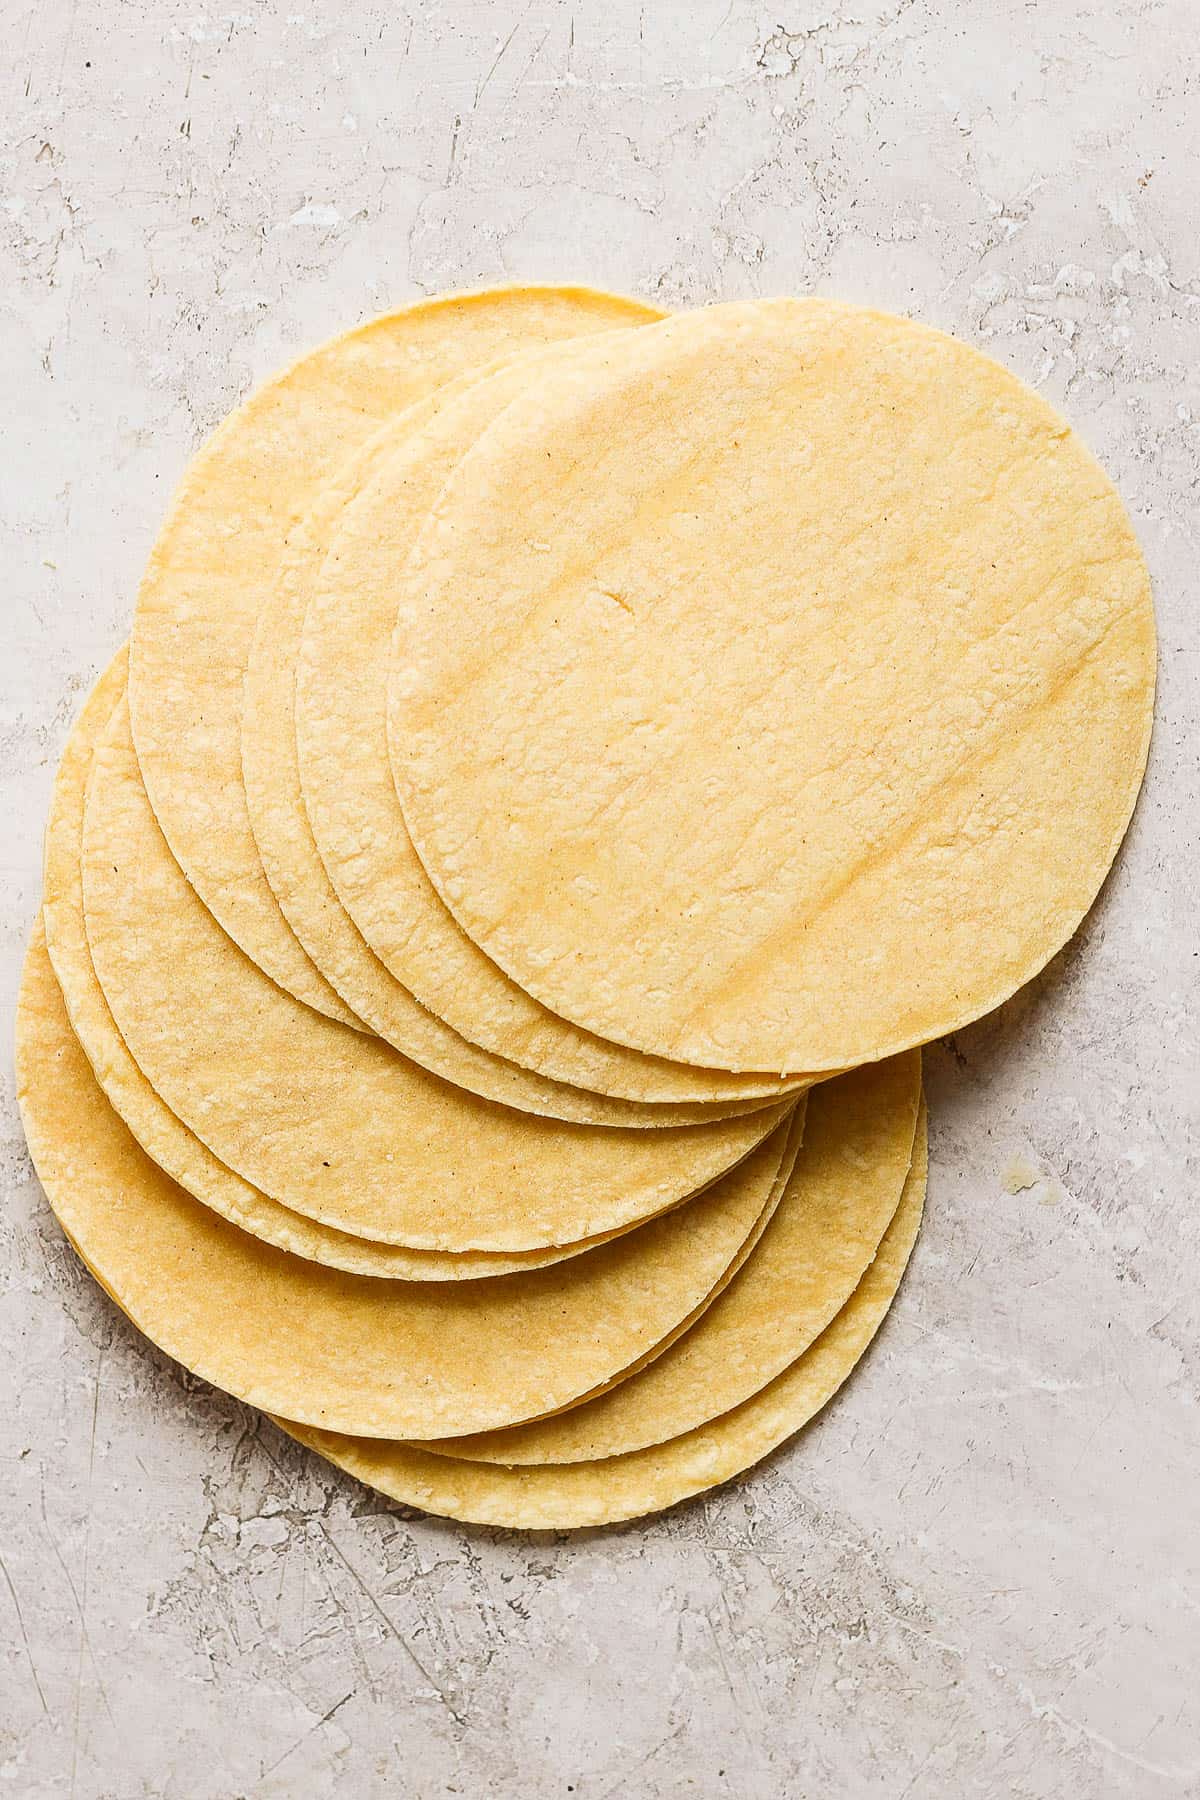 A stack of corn tortillas on the counter.